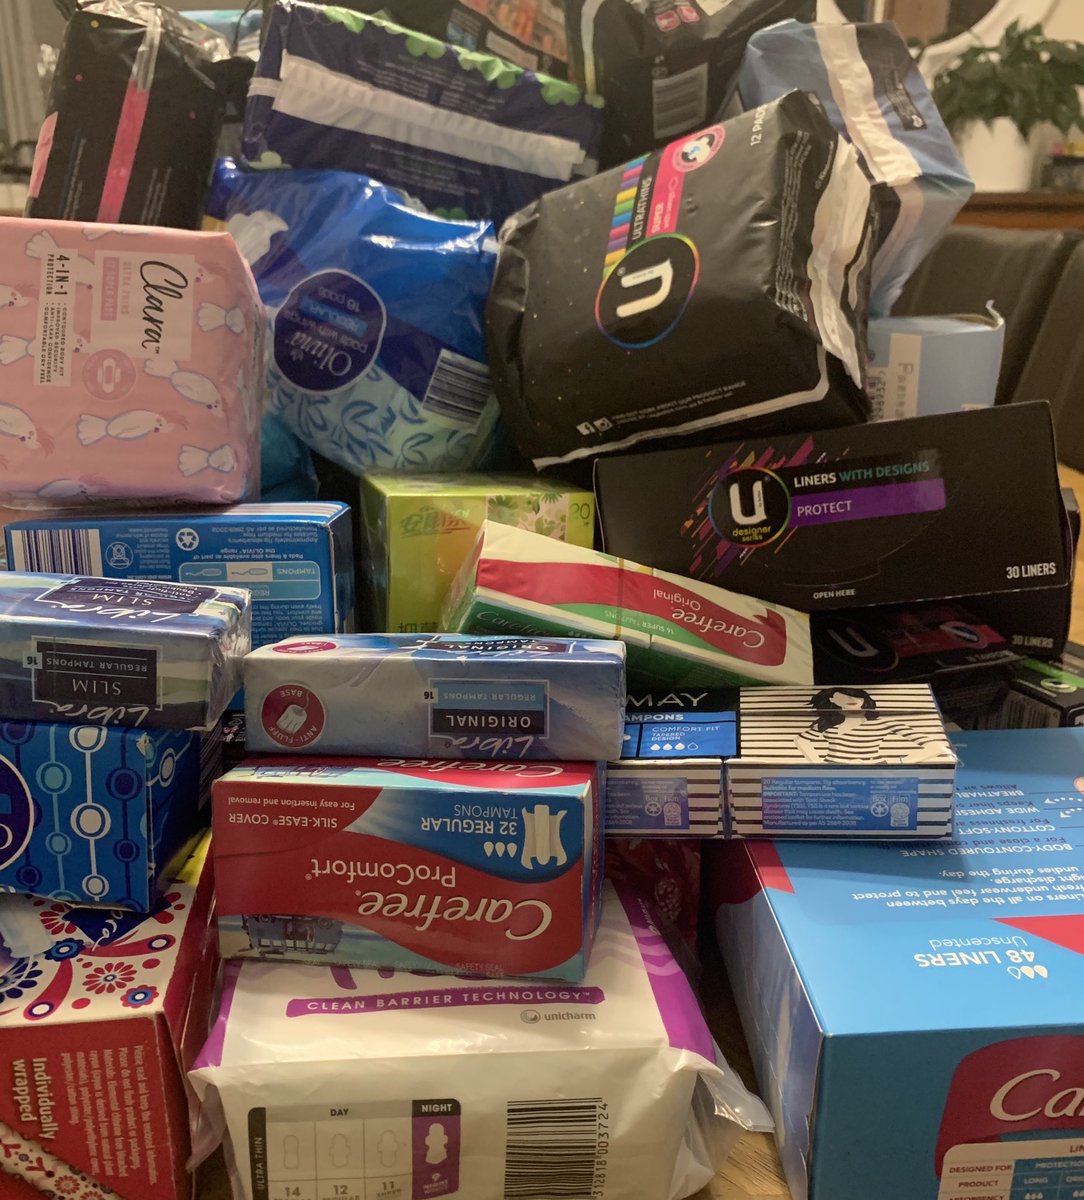 Passing 141 period packs from School of MedSci @UNSWMedicine to #ShareTheDignity drive. Making a difference as we can. Share the Dignity works to make a real, on the ground difference in the lives of those experiencing homelessness, fleeing domestic violence, or doing it tough